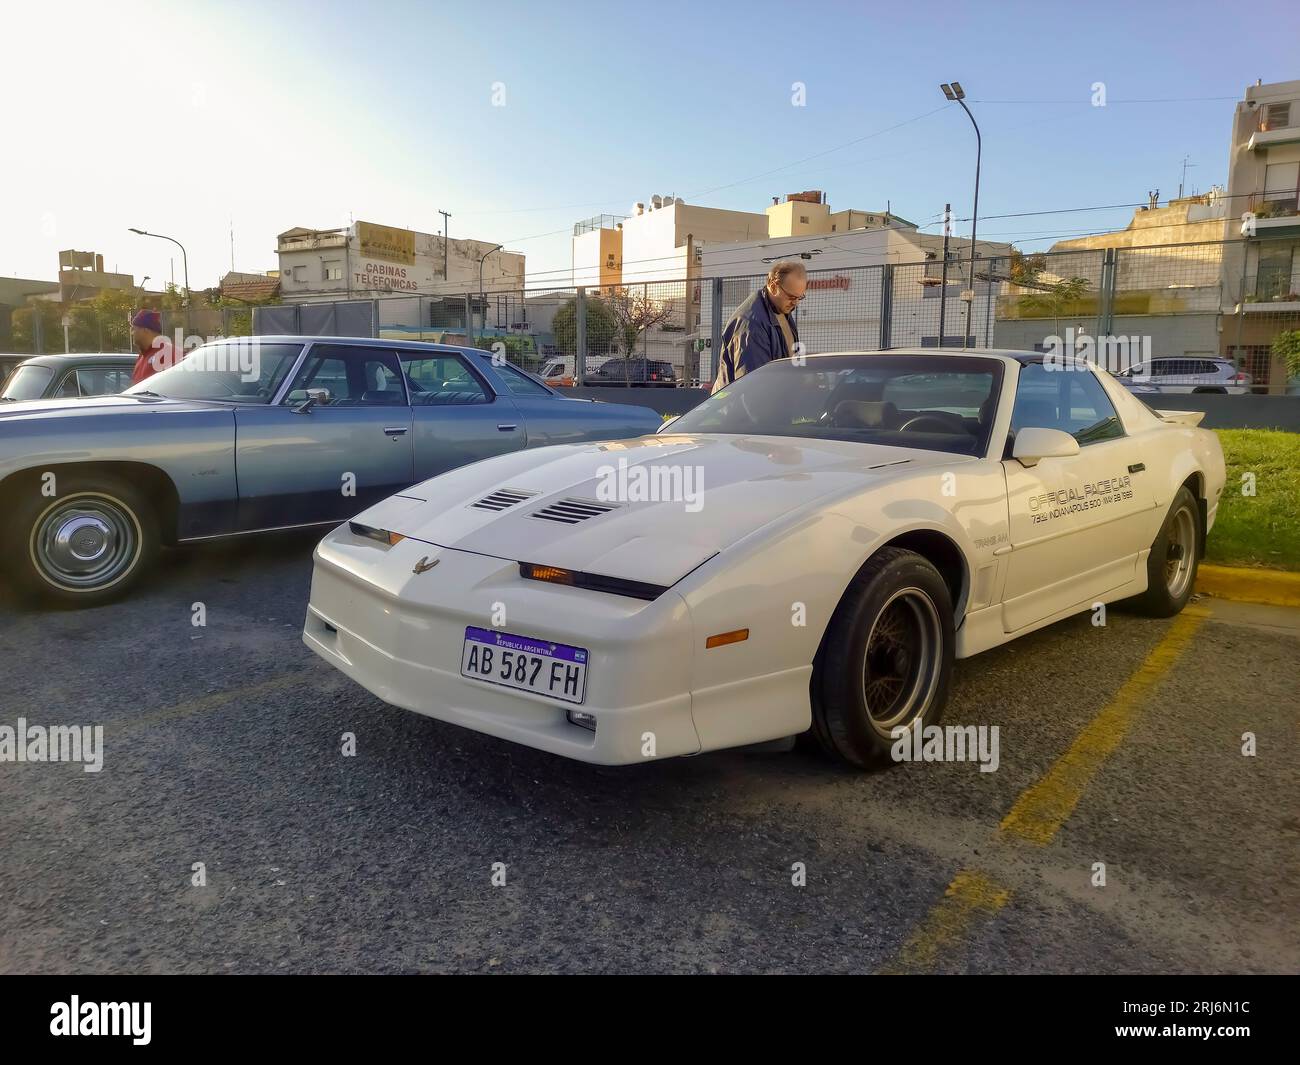 Old white sport 1989 Pontiac Firebird Trans Am Indy 500 pace car in a parking lot. Classic muscle car. Stock Photo